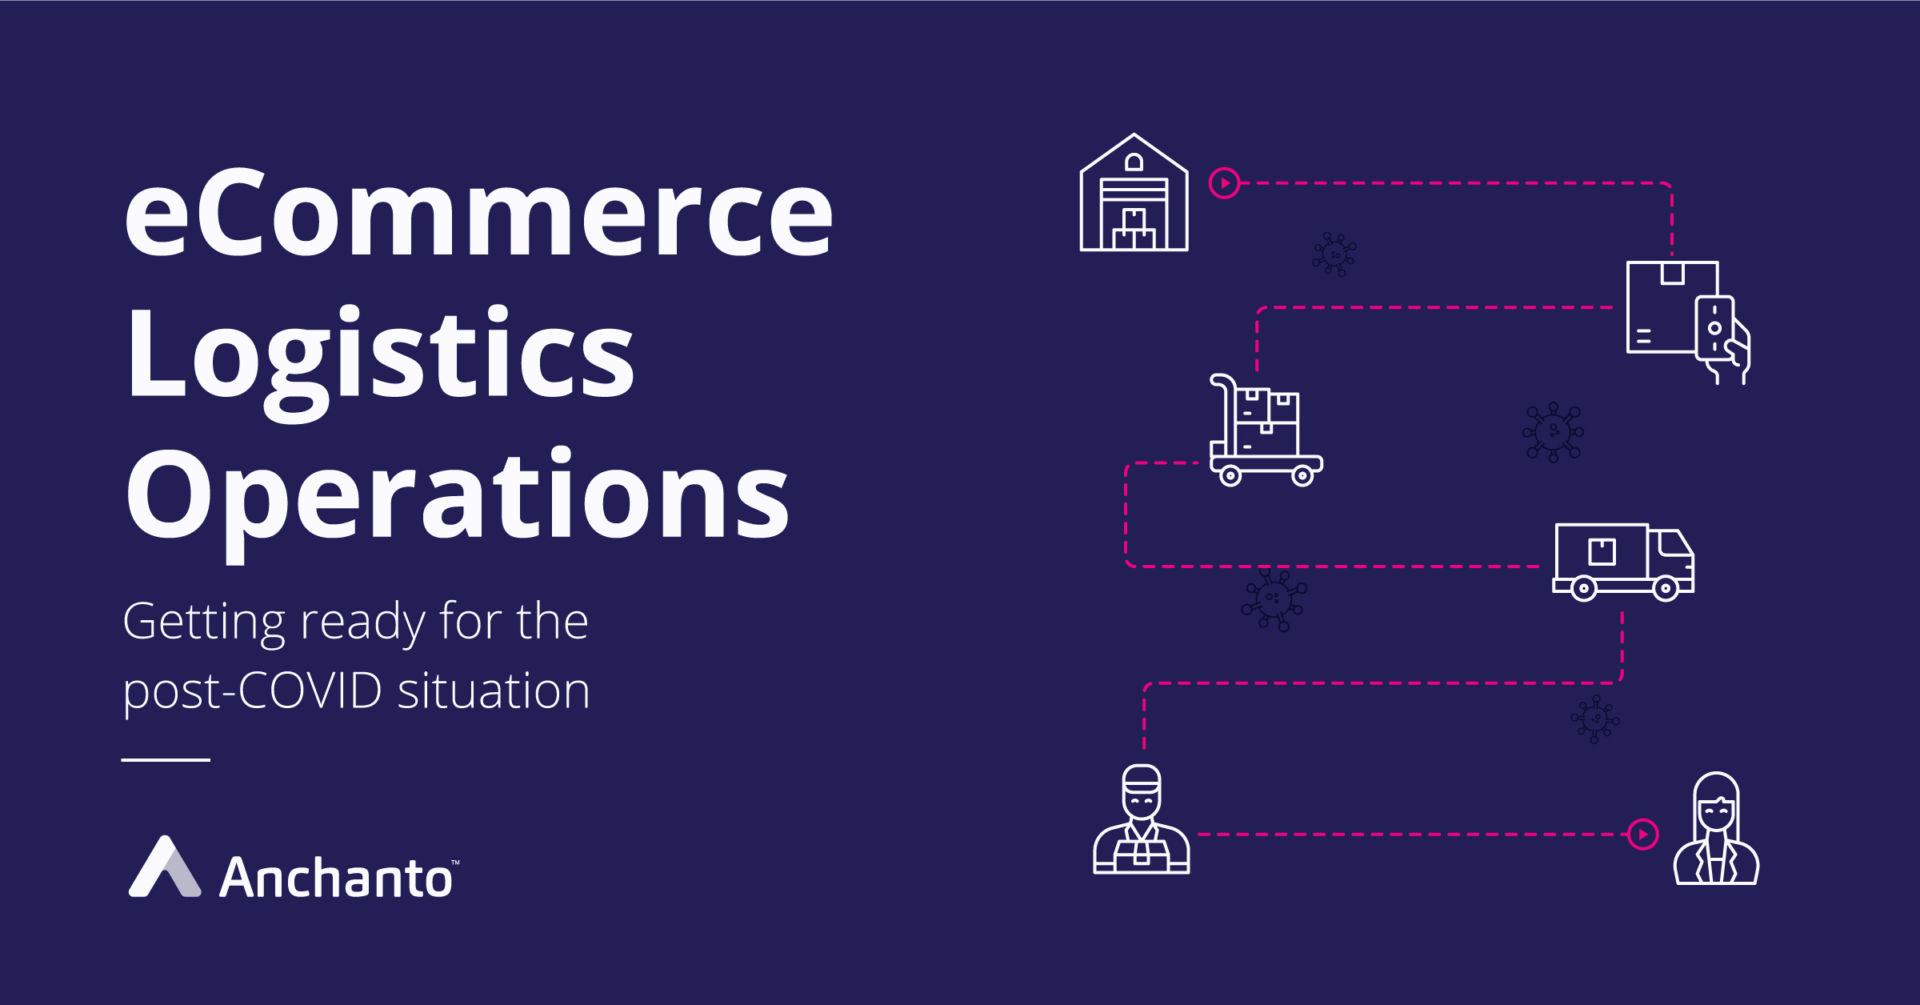 Getting your eCommerce logistics operations ready for the post-COVID situation